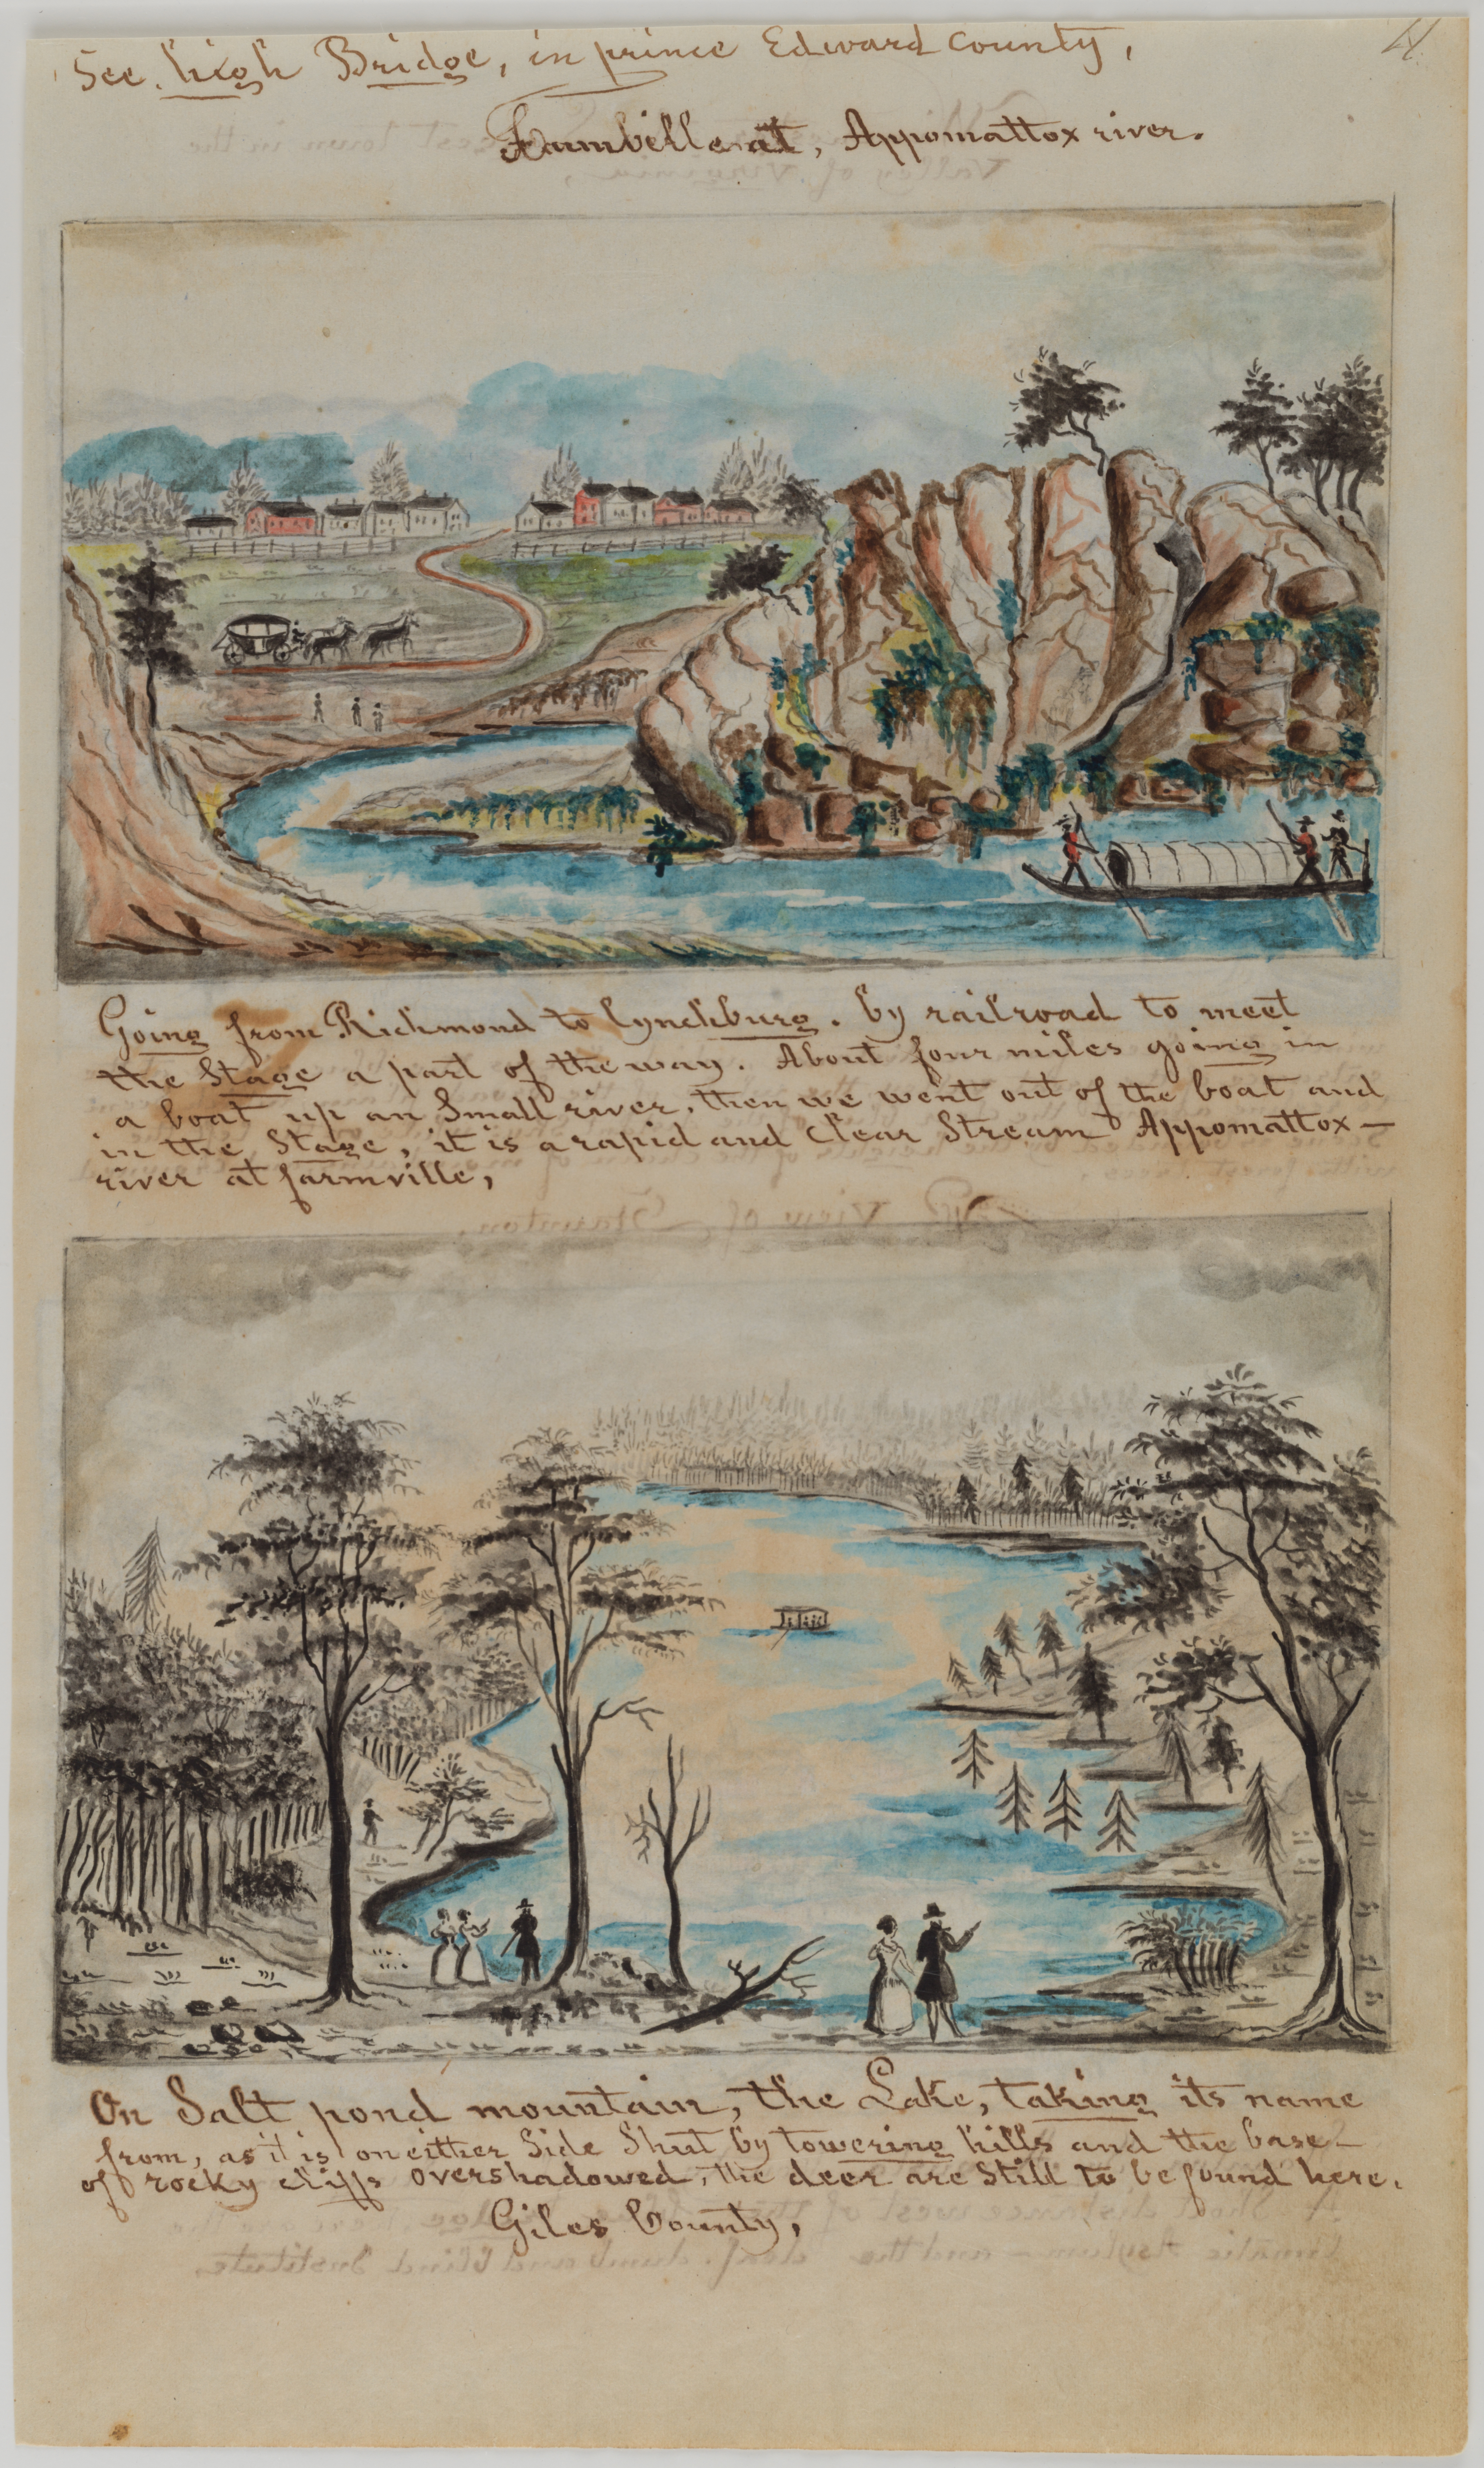 A beige archival document with color drawings of the Appomattox River with people paddling a baot to get across.